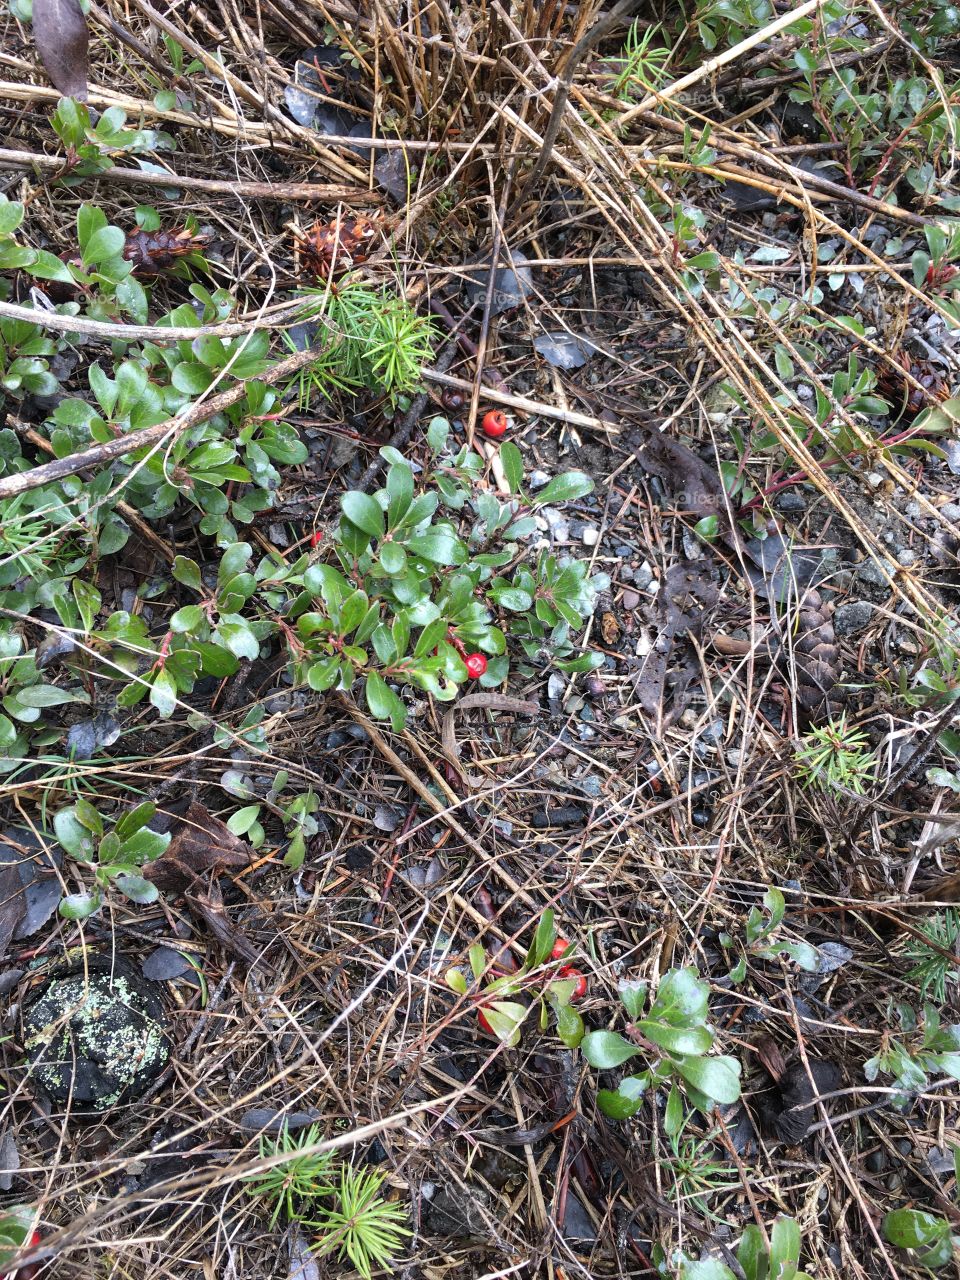 A low growing plant with red berries